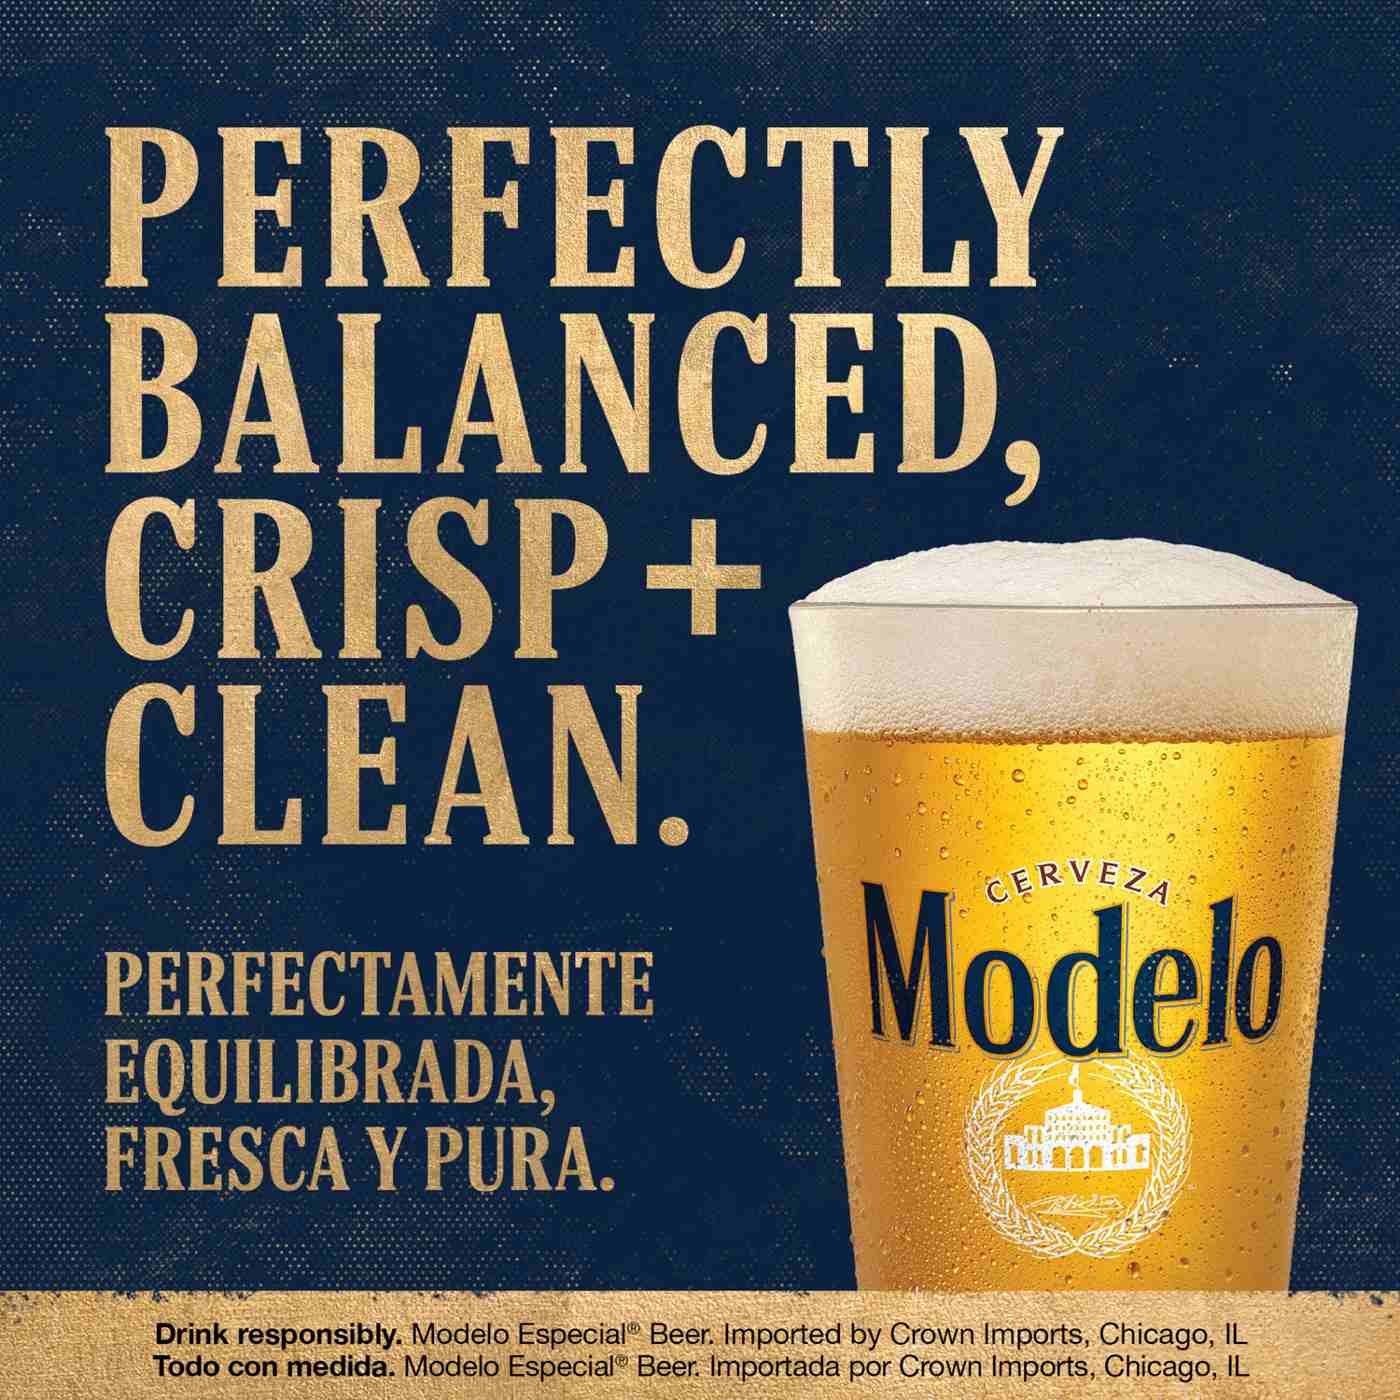 Modelo Especial Mexican Lager Import Beer 12 oz Bottles, 18 pk; image 11 of 11